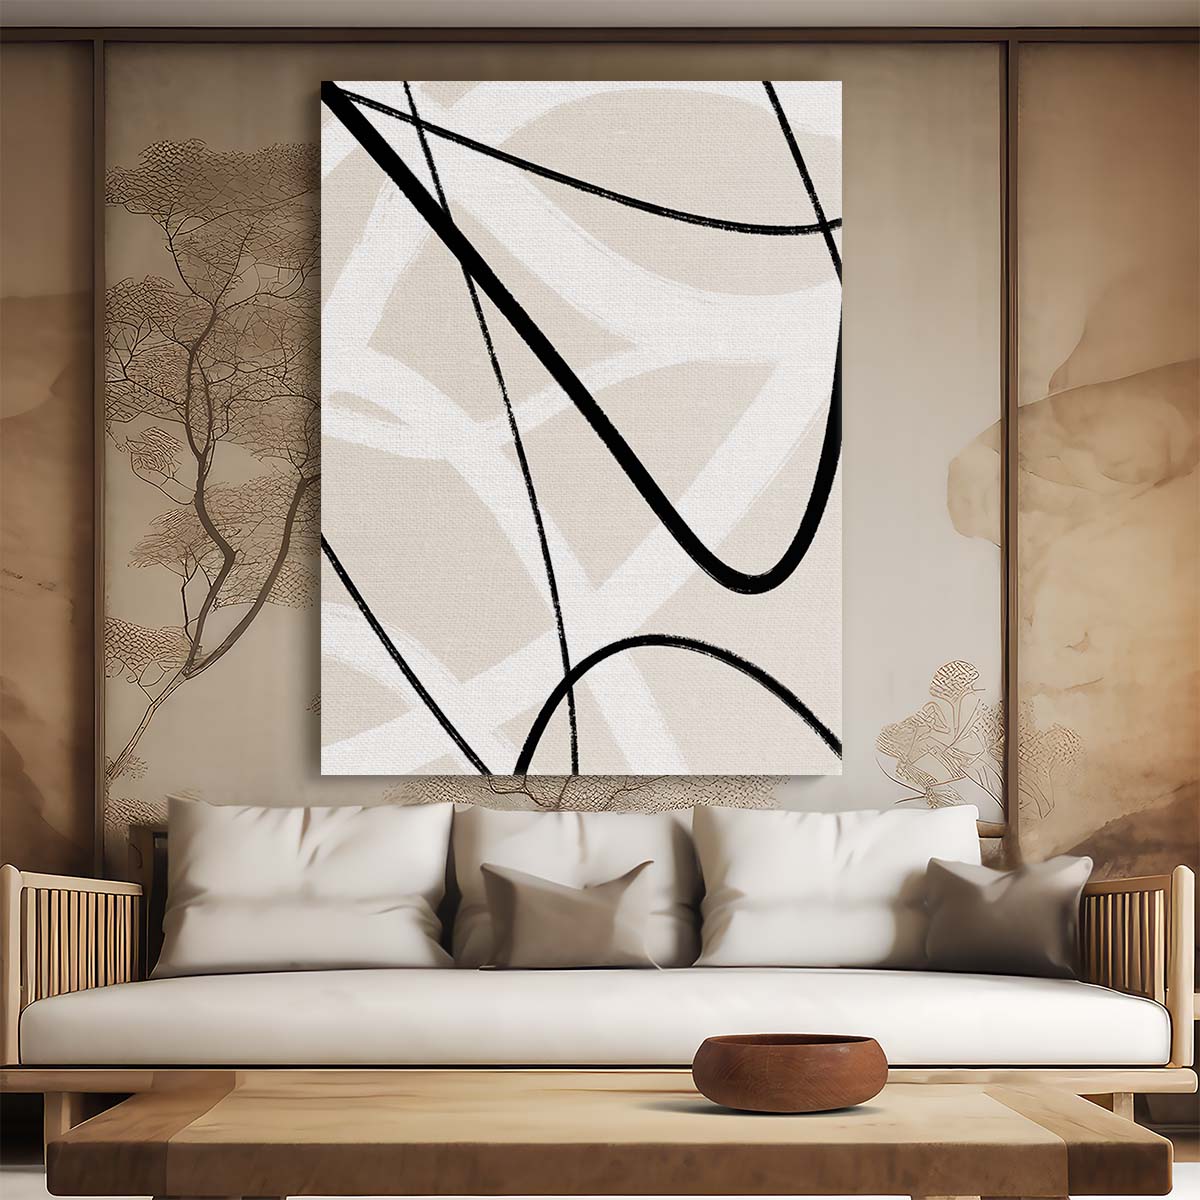 Beige Abstract Illustration Painting - Hand-drawn Graphic Art by uplusmestudio by Luxuriance Designs, made in USA